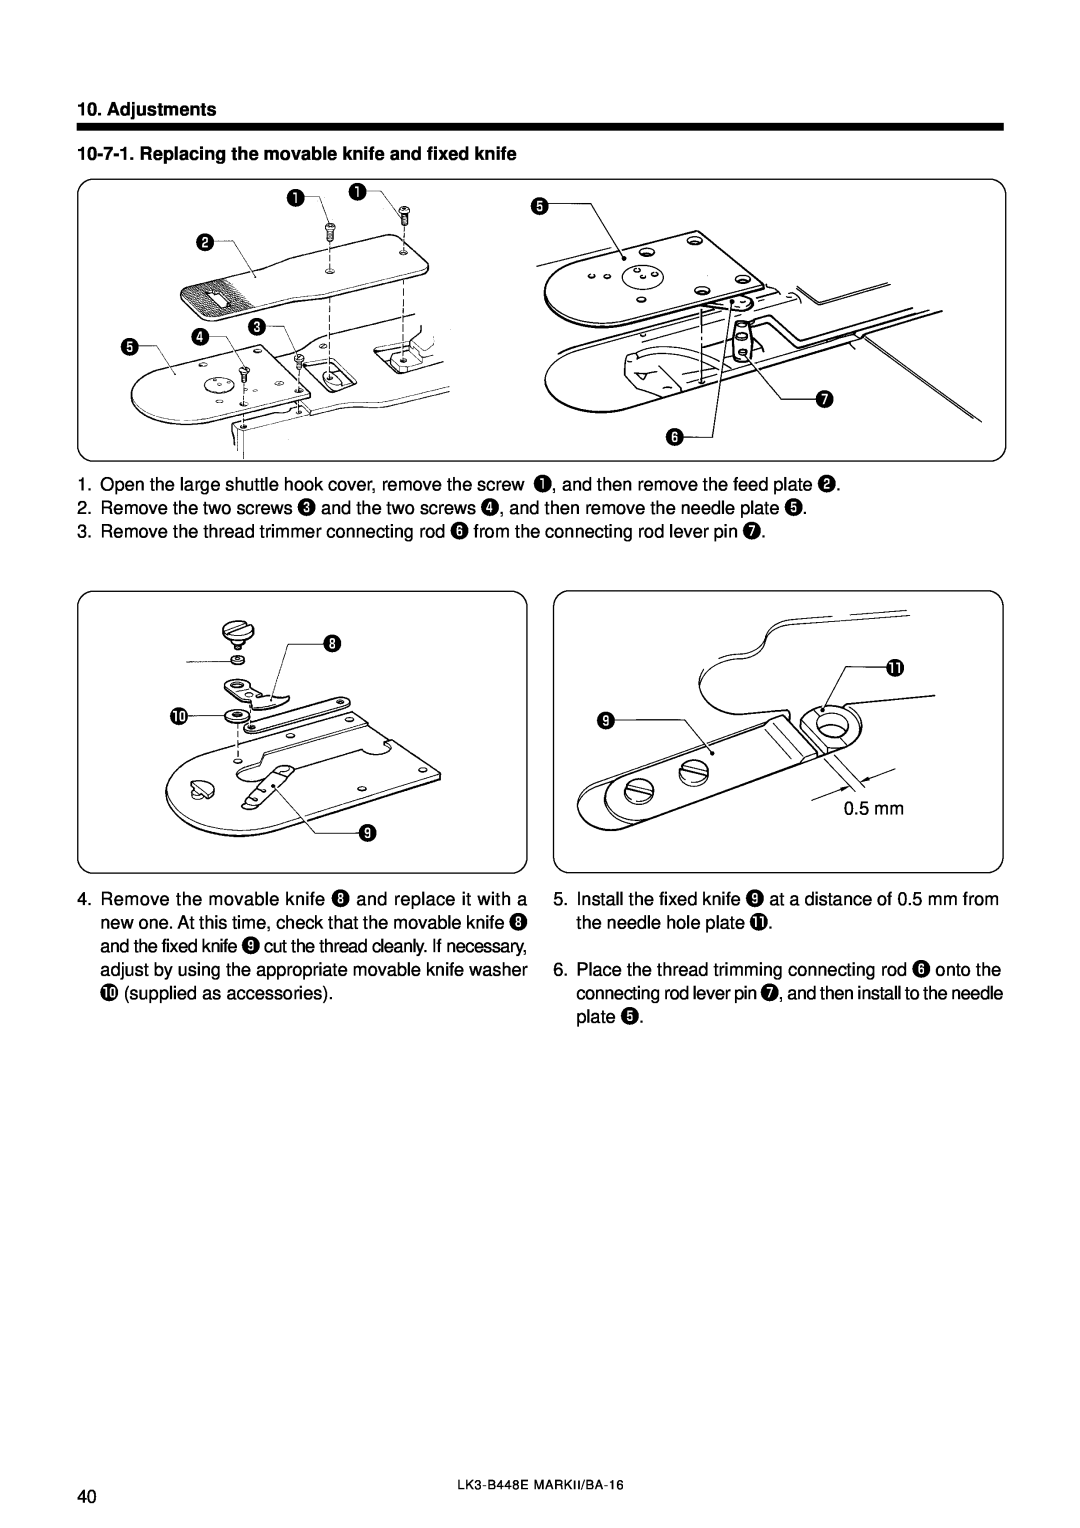 Brother LK3-B448E instruction manual Adjustments 10-7-1. Replacing the movable knife and fixed knife 